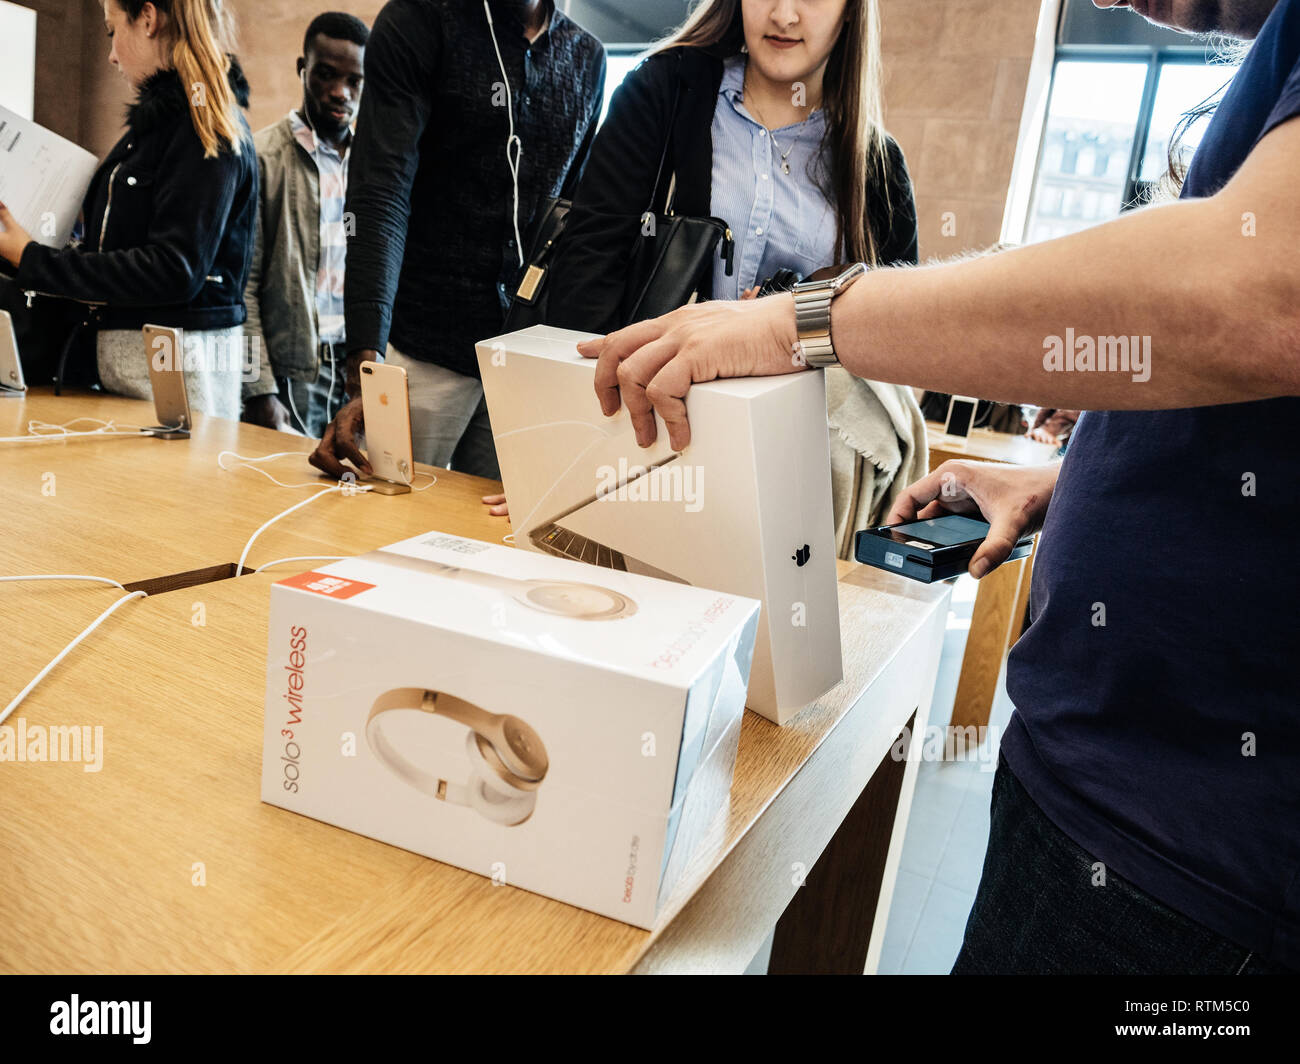 PARIS, FRANCE - SEP 22, 2017: New iPhone 8 and iPhone 8 Plus, as well the  updated Apple Watch, Apple TV goes on sale today in Apple Store with young  customer student